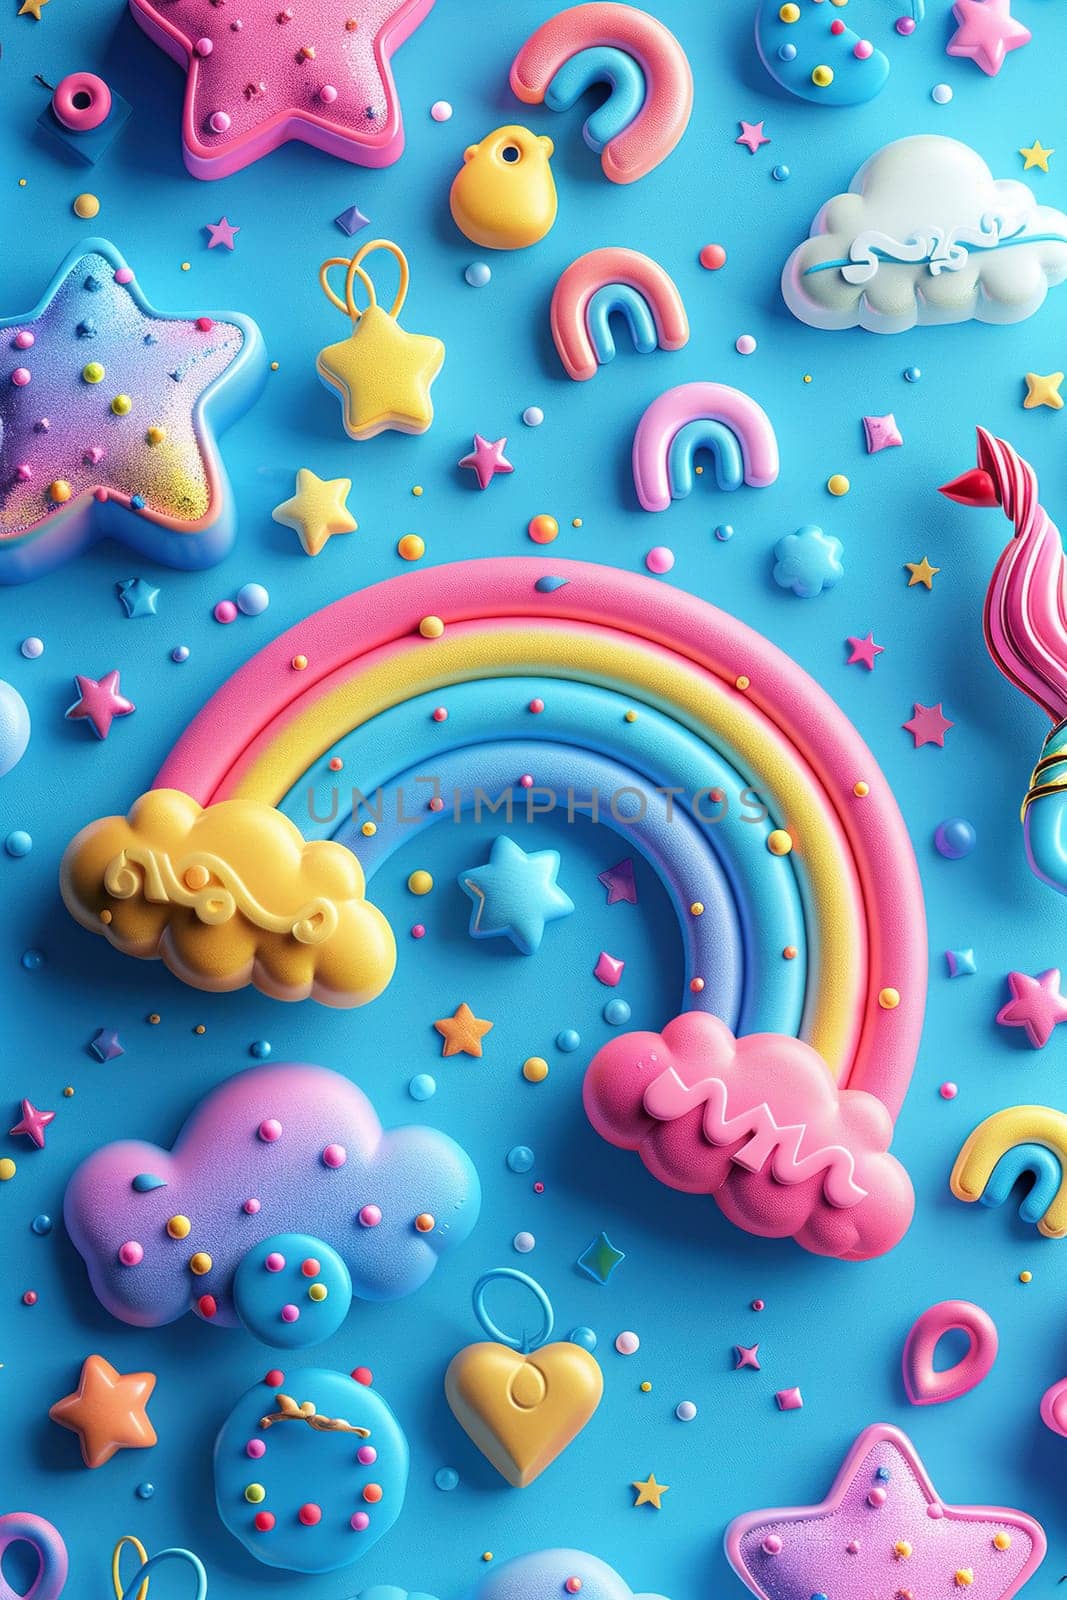 Illustration in 3D style with rainbow, stars and clouds. Vertical cartoon background for tik tok, instagram, stories.